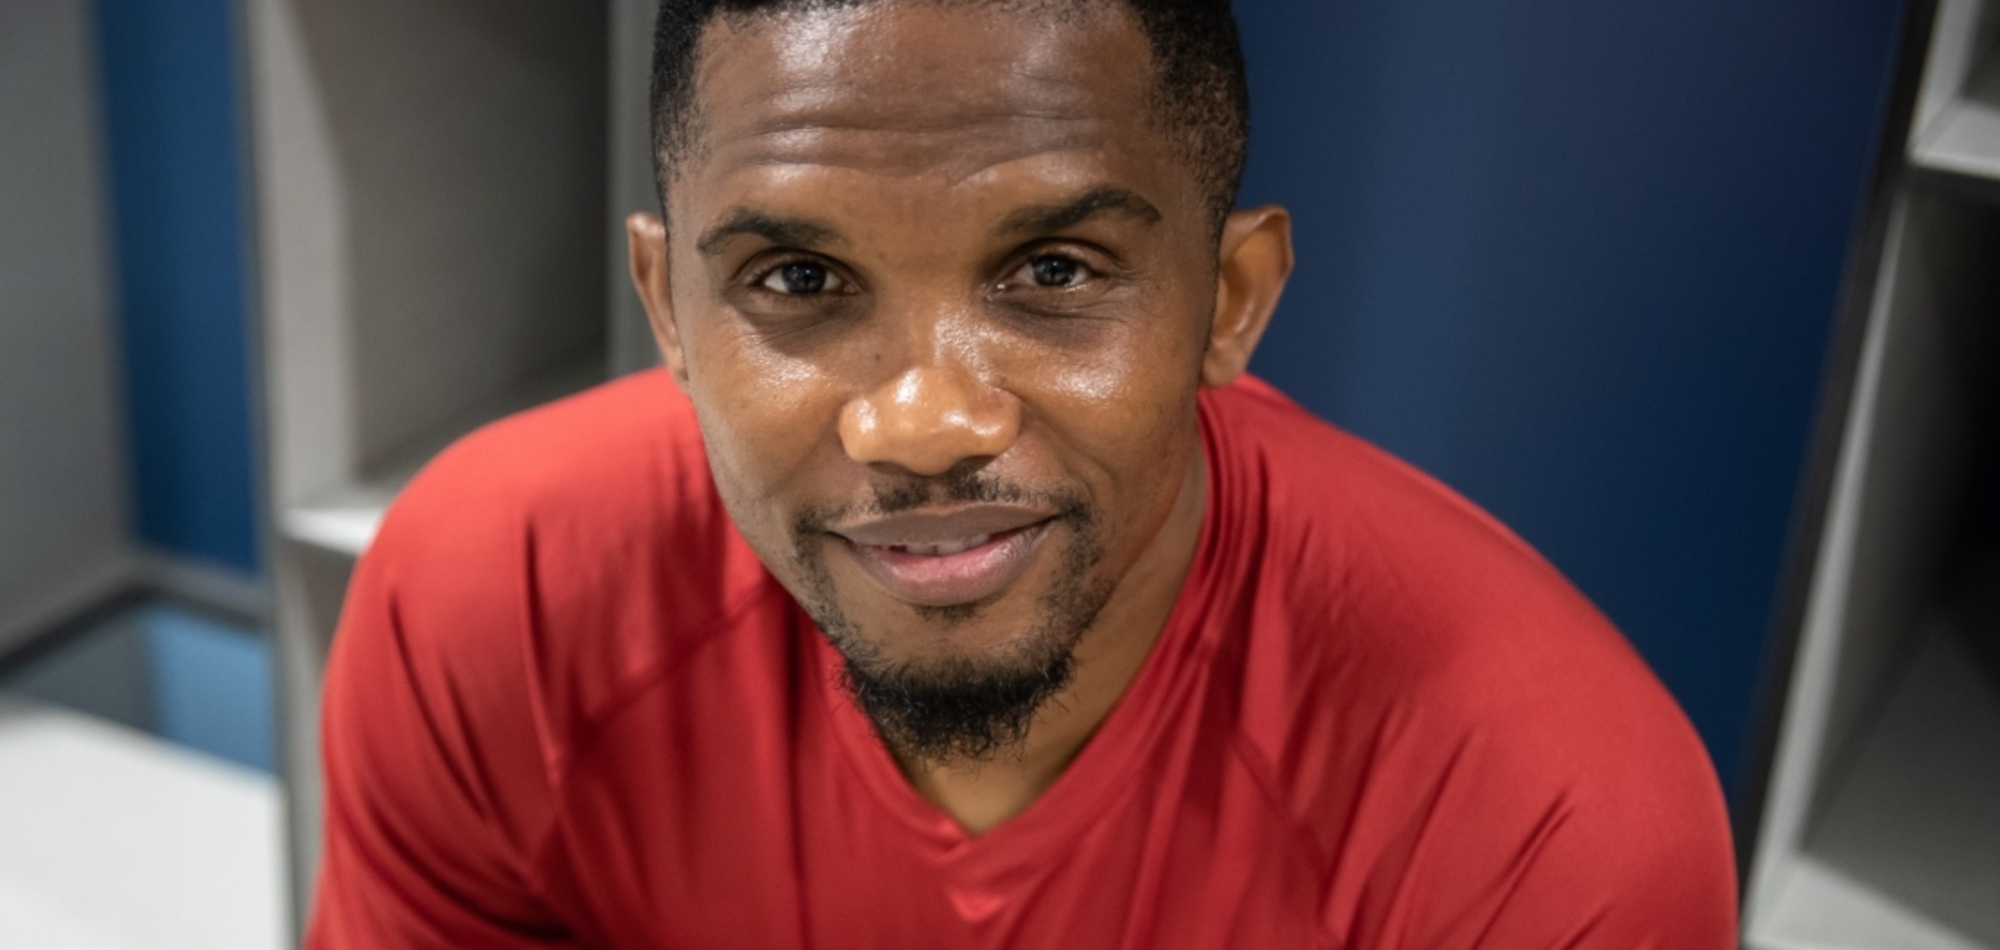 Samuel Eto’o: Qatar 2022 will be a special experience for football fans